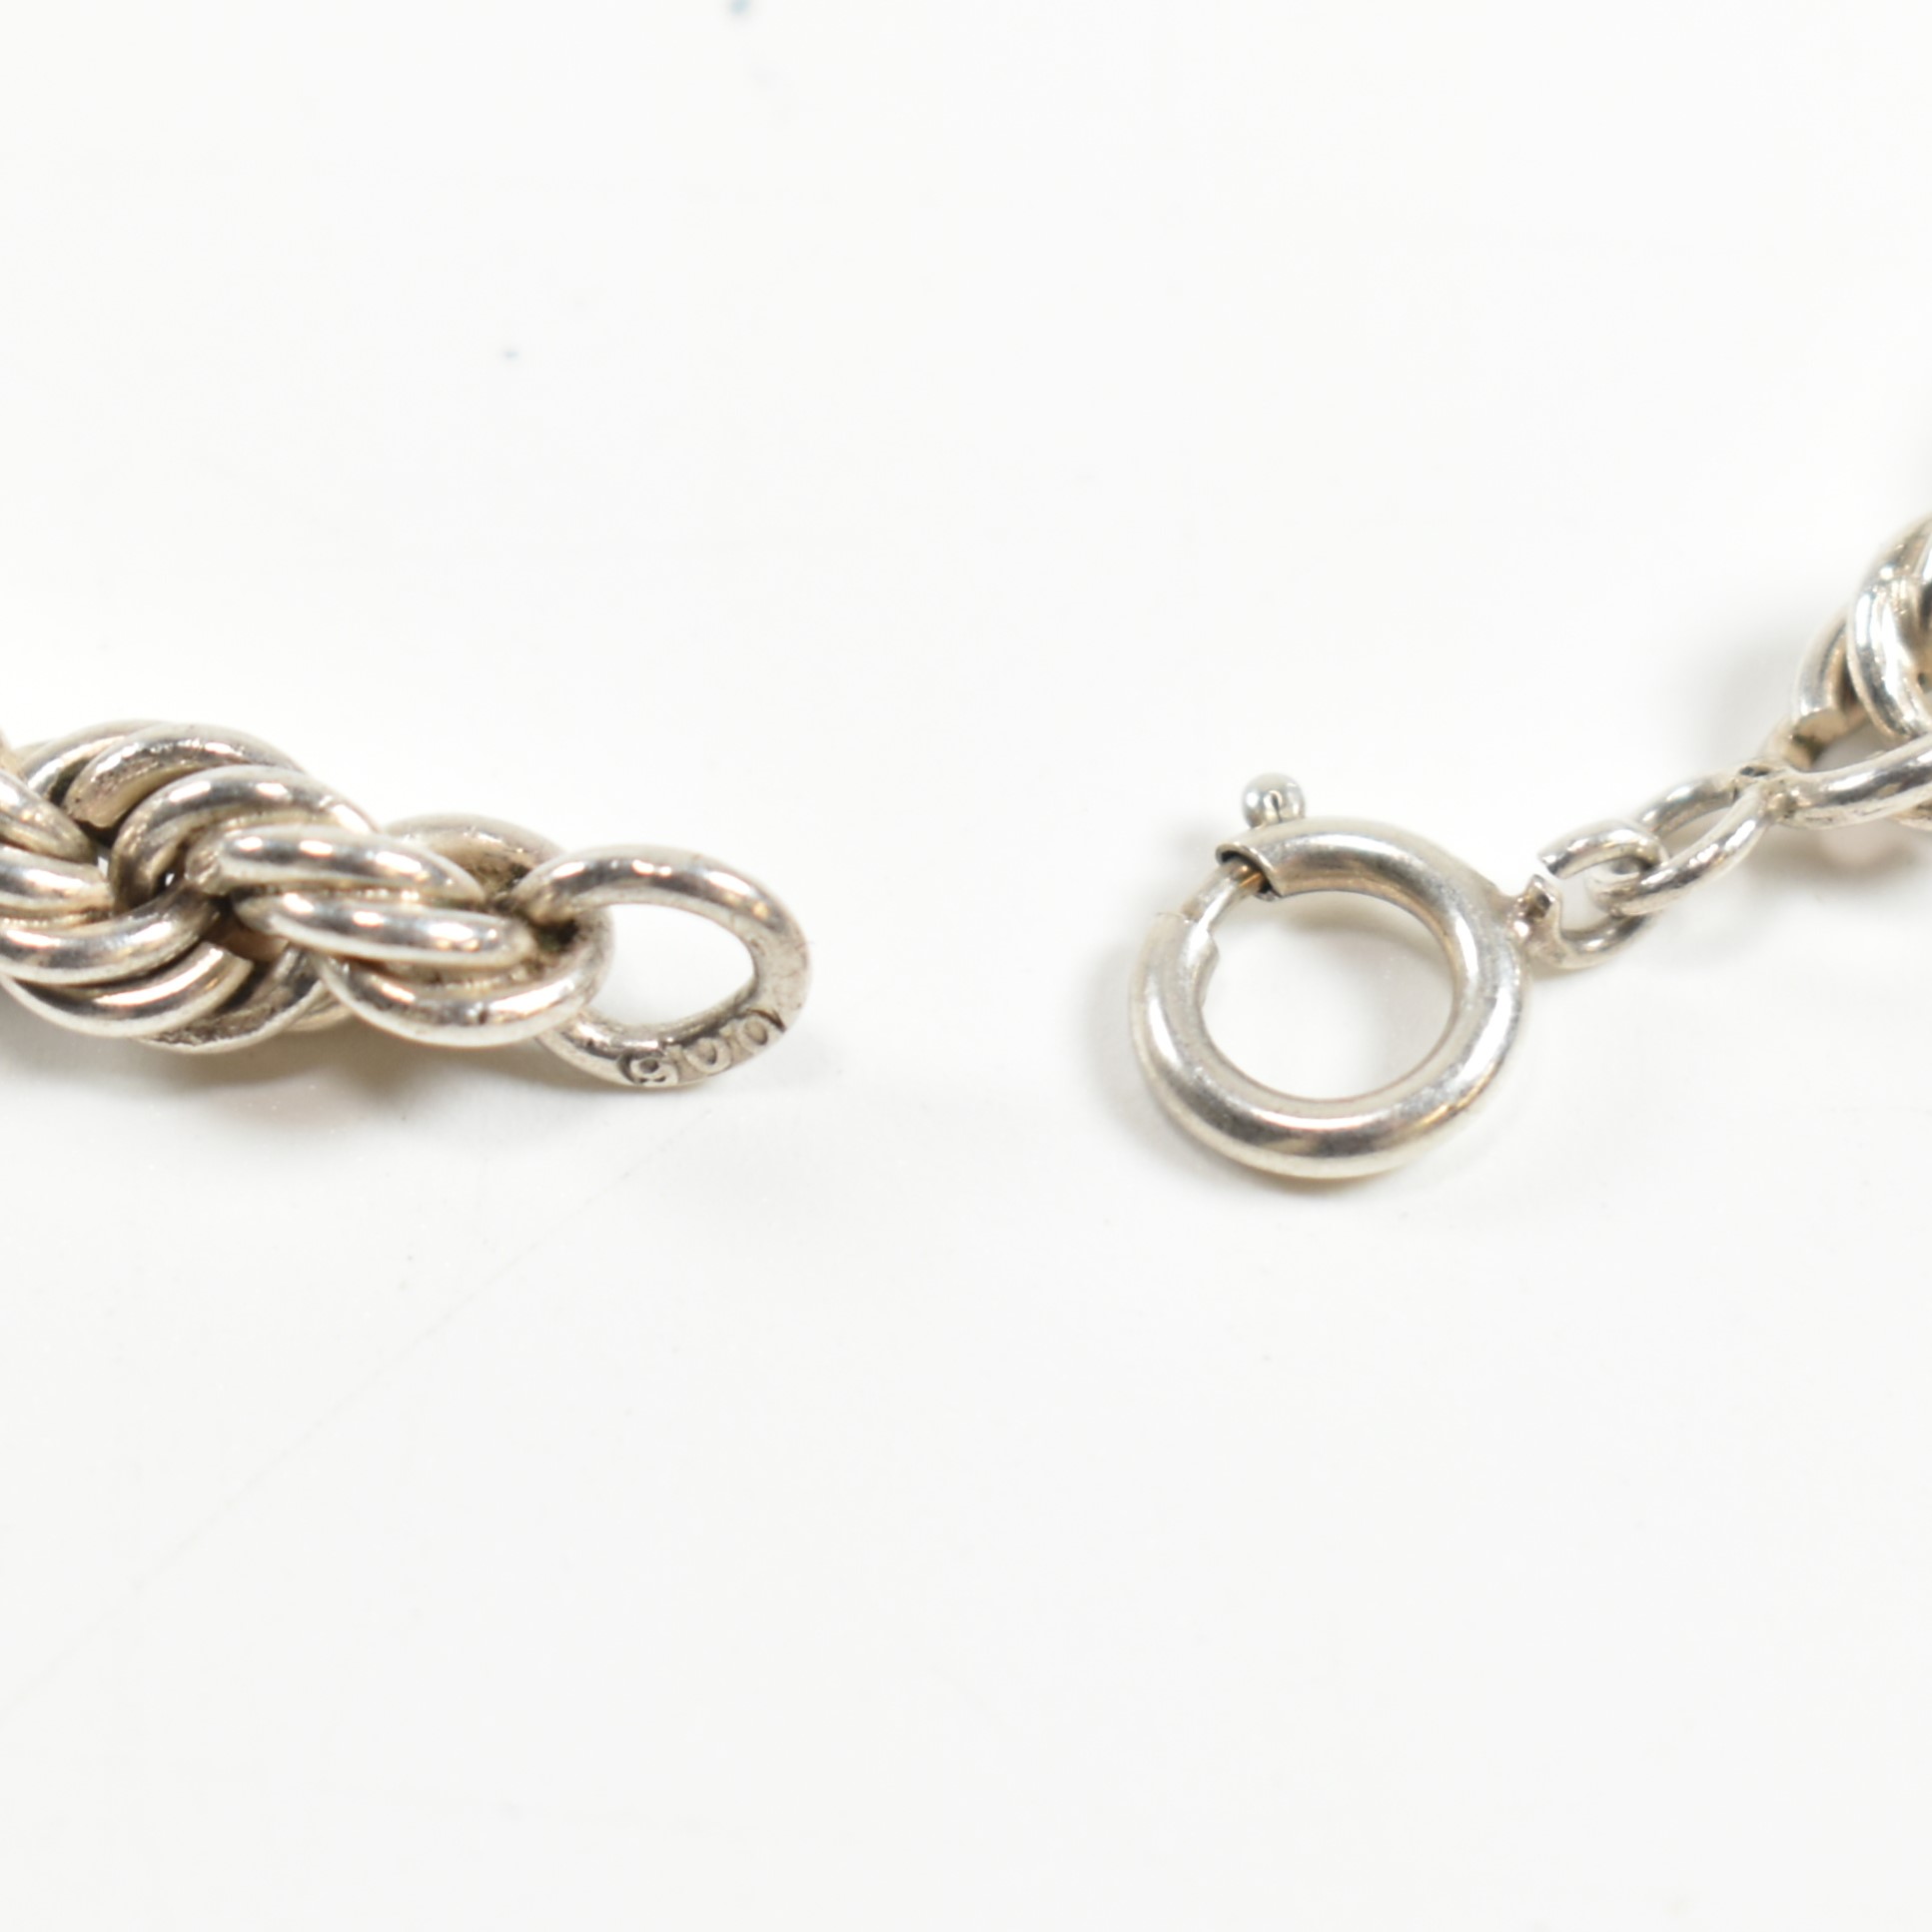 SILVER TWISTED ROPE CHAIN NECKLACE - Image 2 of 4